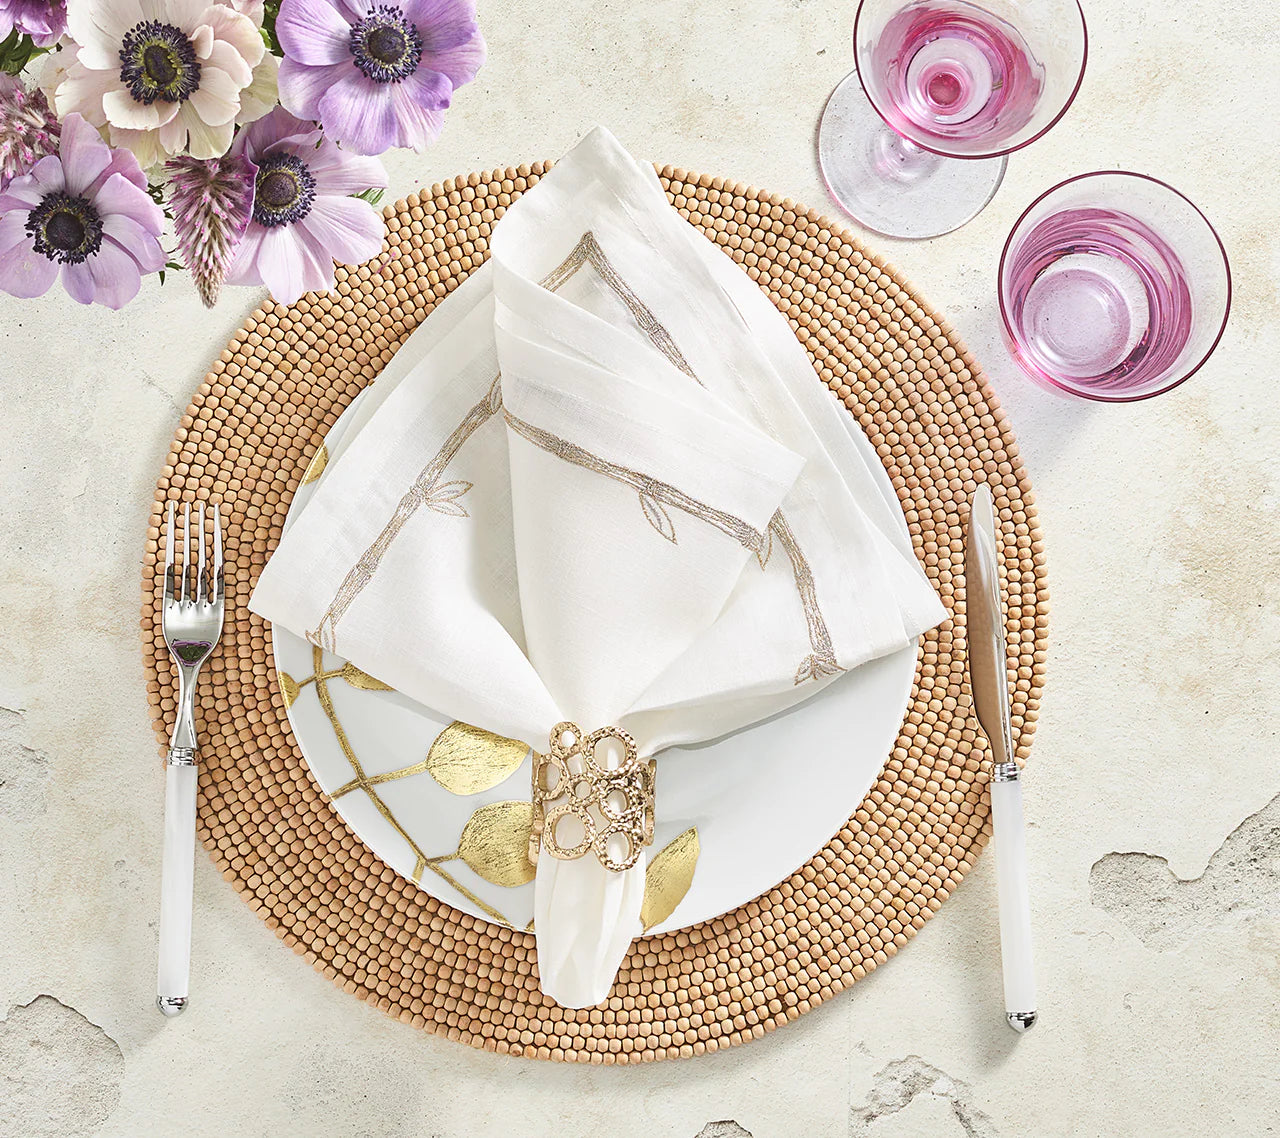 Bamboo Napkin in White, Gold & Silver, Set of 4